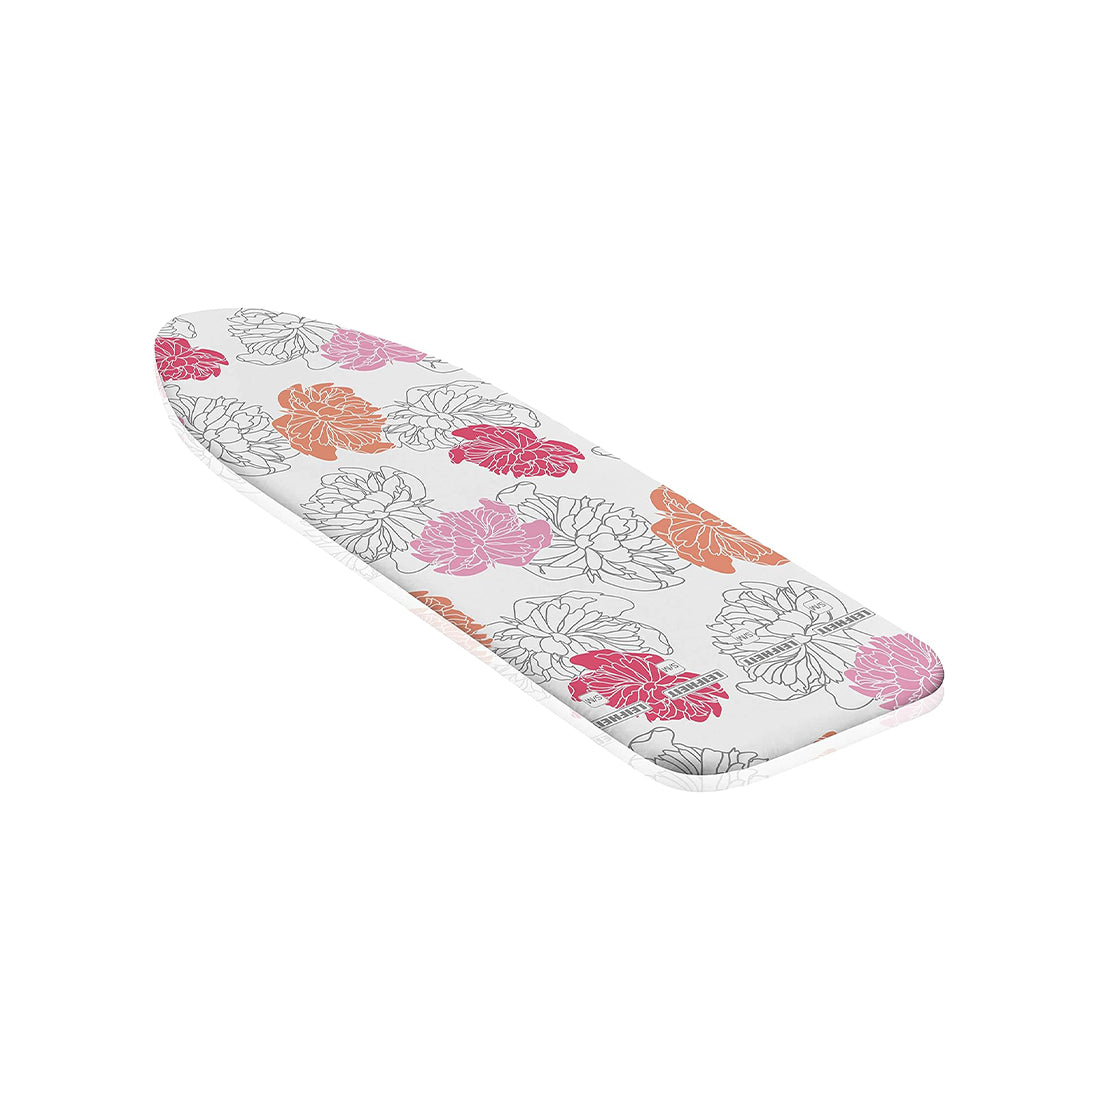 71601 Ironing Board Cover Cotton Comfort S/M